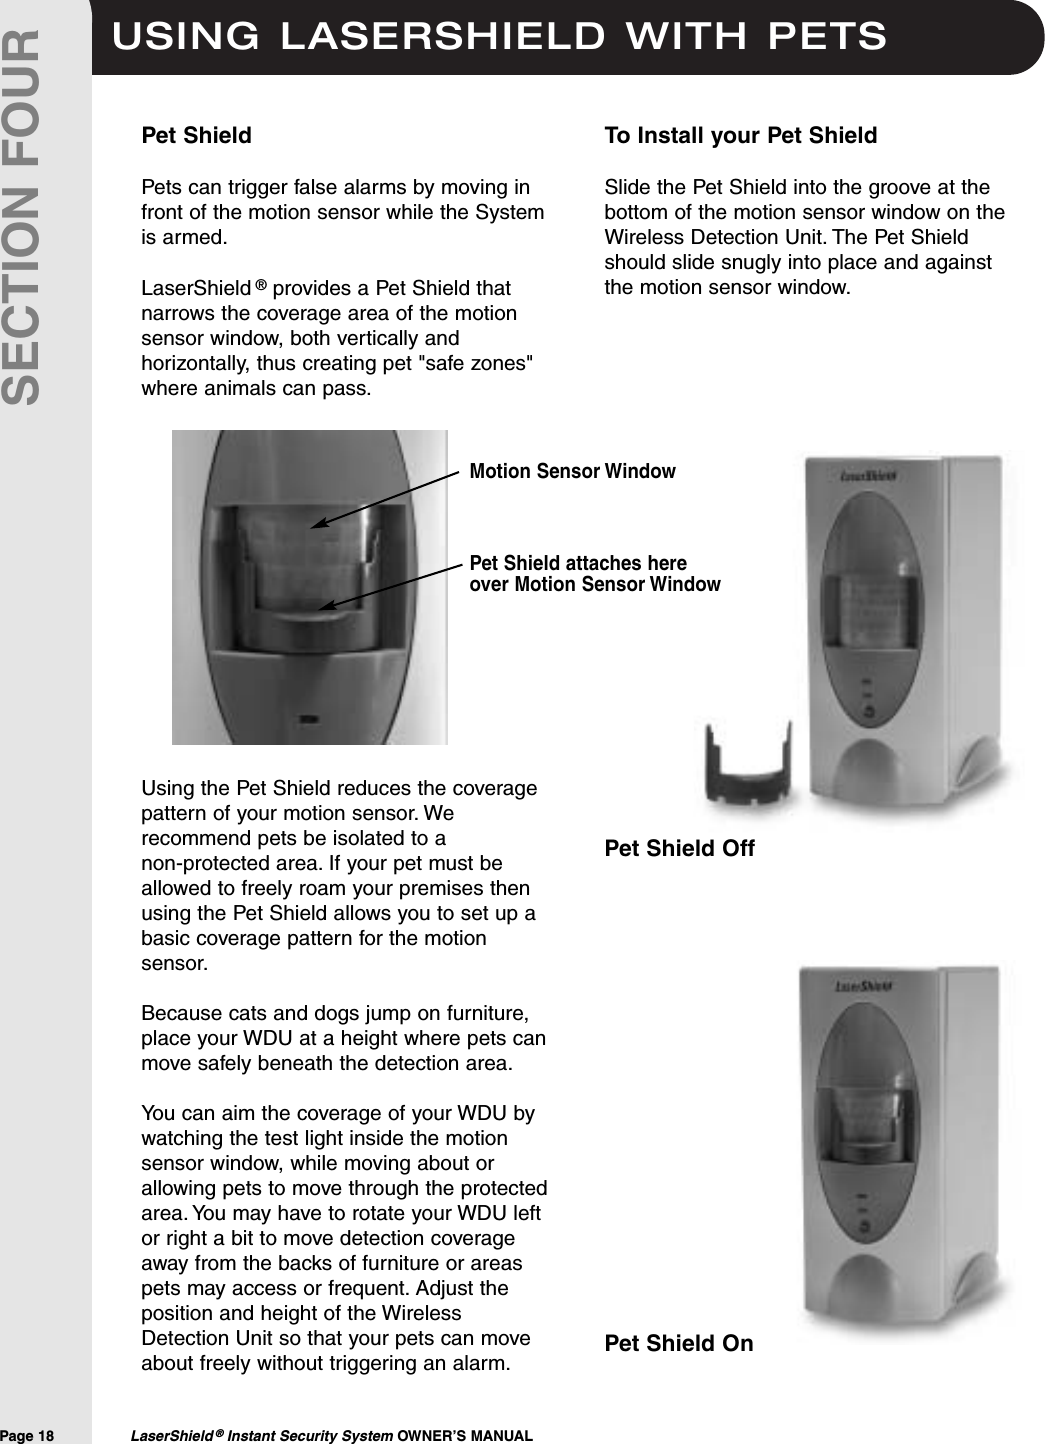 USING LASERSHIELD WITH PETSPage 18  LaserShield ®Instant Security System OWNER’S MANUALSECTION FOURPet ShieldPets can trigger false alarms by moving infront of the motion sensor while the Systemis armed.LaserShield ®provides a Pet Shield thatnarrows the coverage area of the motionsensor window, both vertically andhorizontally, thus creating pet &quot;safe zones&quot;where animals can pass.Using the Pet Shield reduces the coveragepattern of your motion sensor. Werecommend pets be isolated to a non-protected area. If your pet must beallowed to freely roam your premises thenusing the Pet Shield allows you to set up abasic coverage pattern for the motionsensor.Because cats and dogs jump on furniture,place your WDU at a height where pets canmove safely beneath the detection area.You can aim the coverage of your WDU bywatching the test light inside the motionsensor window, while moving about orallowing pets to move through the protectedarea. You may have to rotate your WDU leftor right a bit to move detection coverageaway from the backs of furniture or areaspets may access or frequent. Adjust theposition and height of the WirelessDetection Unit so that your pets can moveabout freely without triggering an alarm.To Install your Pet ShieldSlide the Pet Shield into the groove at thebottom of the motion sensor window on theWireless Detection Unit. The Pet Shieldshould slide snugly into place and againstthe motion sensor window.Pet Shield attaches hereover Motion Sensor WindowMotion Sensor WindowPet Shield OffPet Shield On